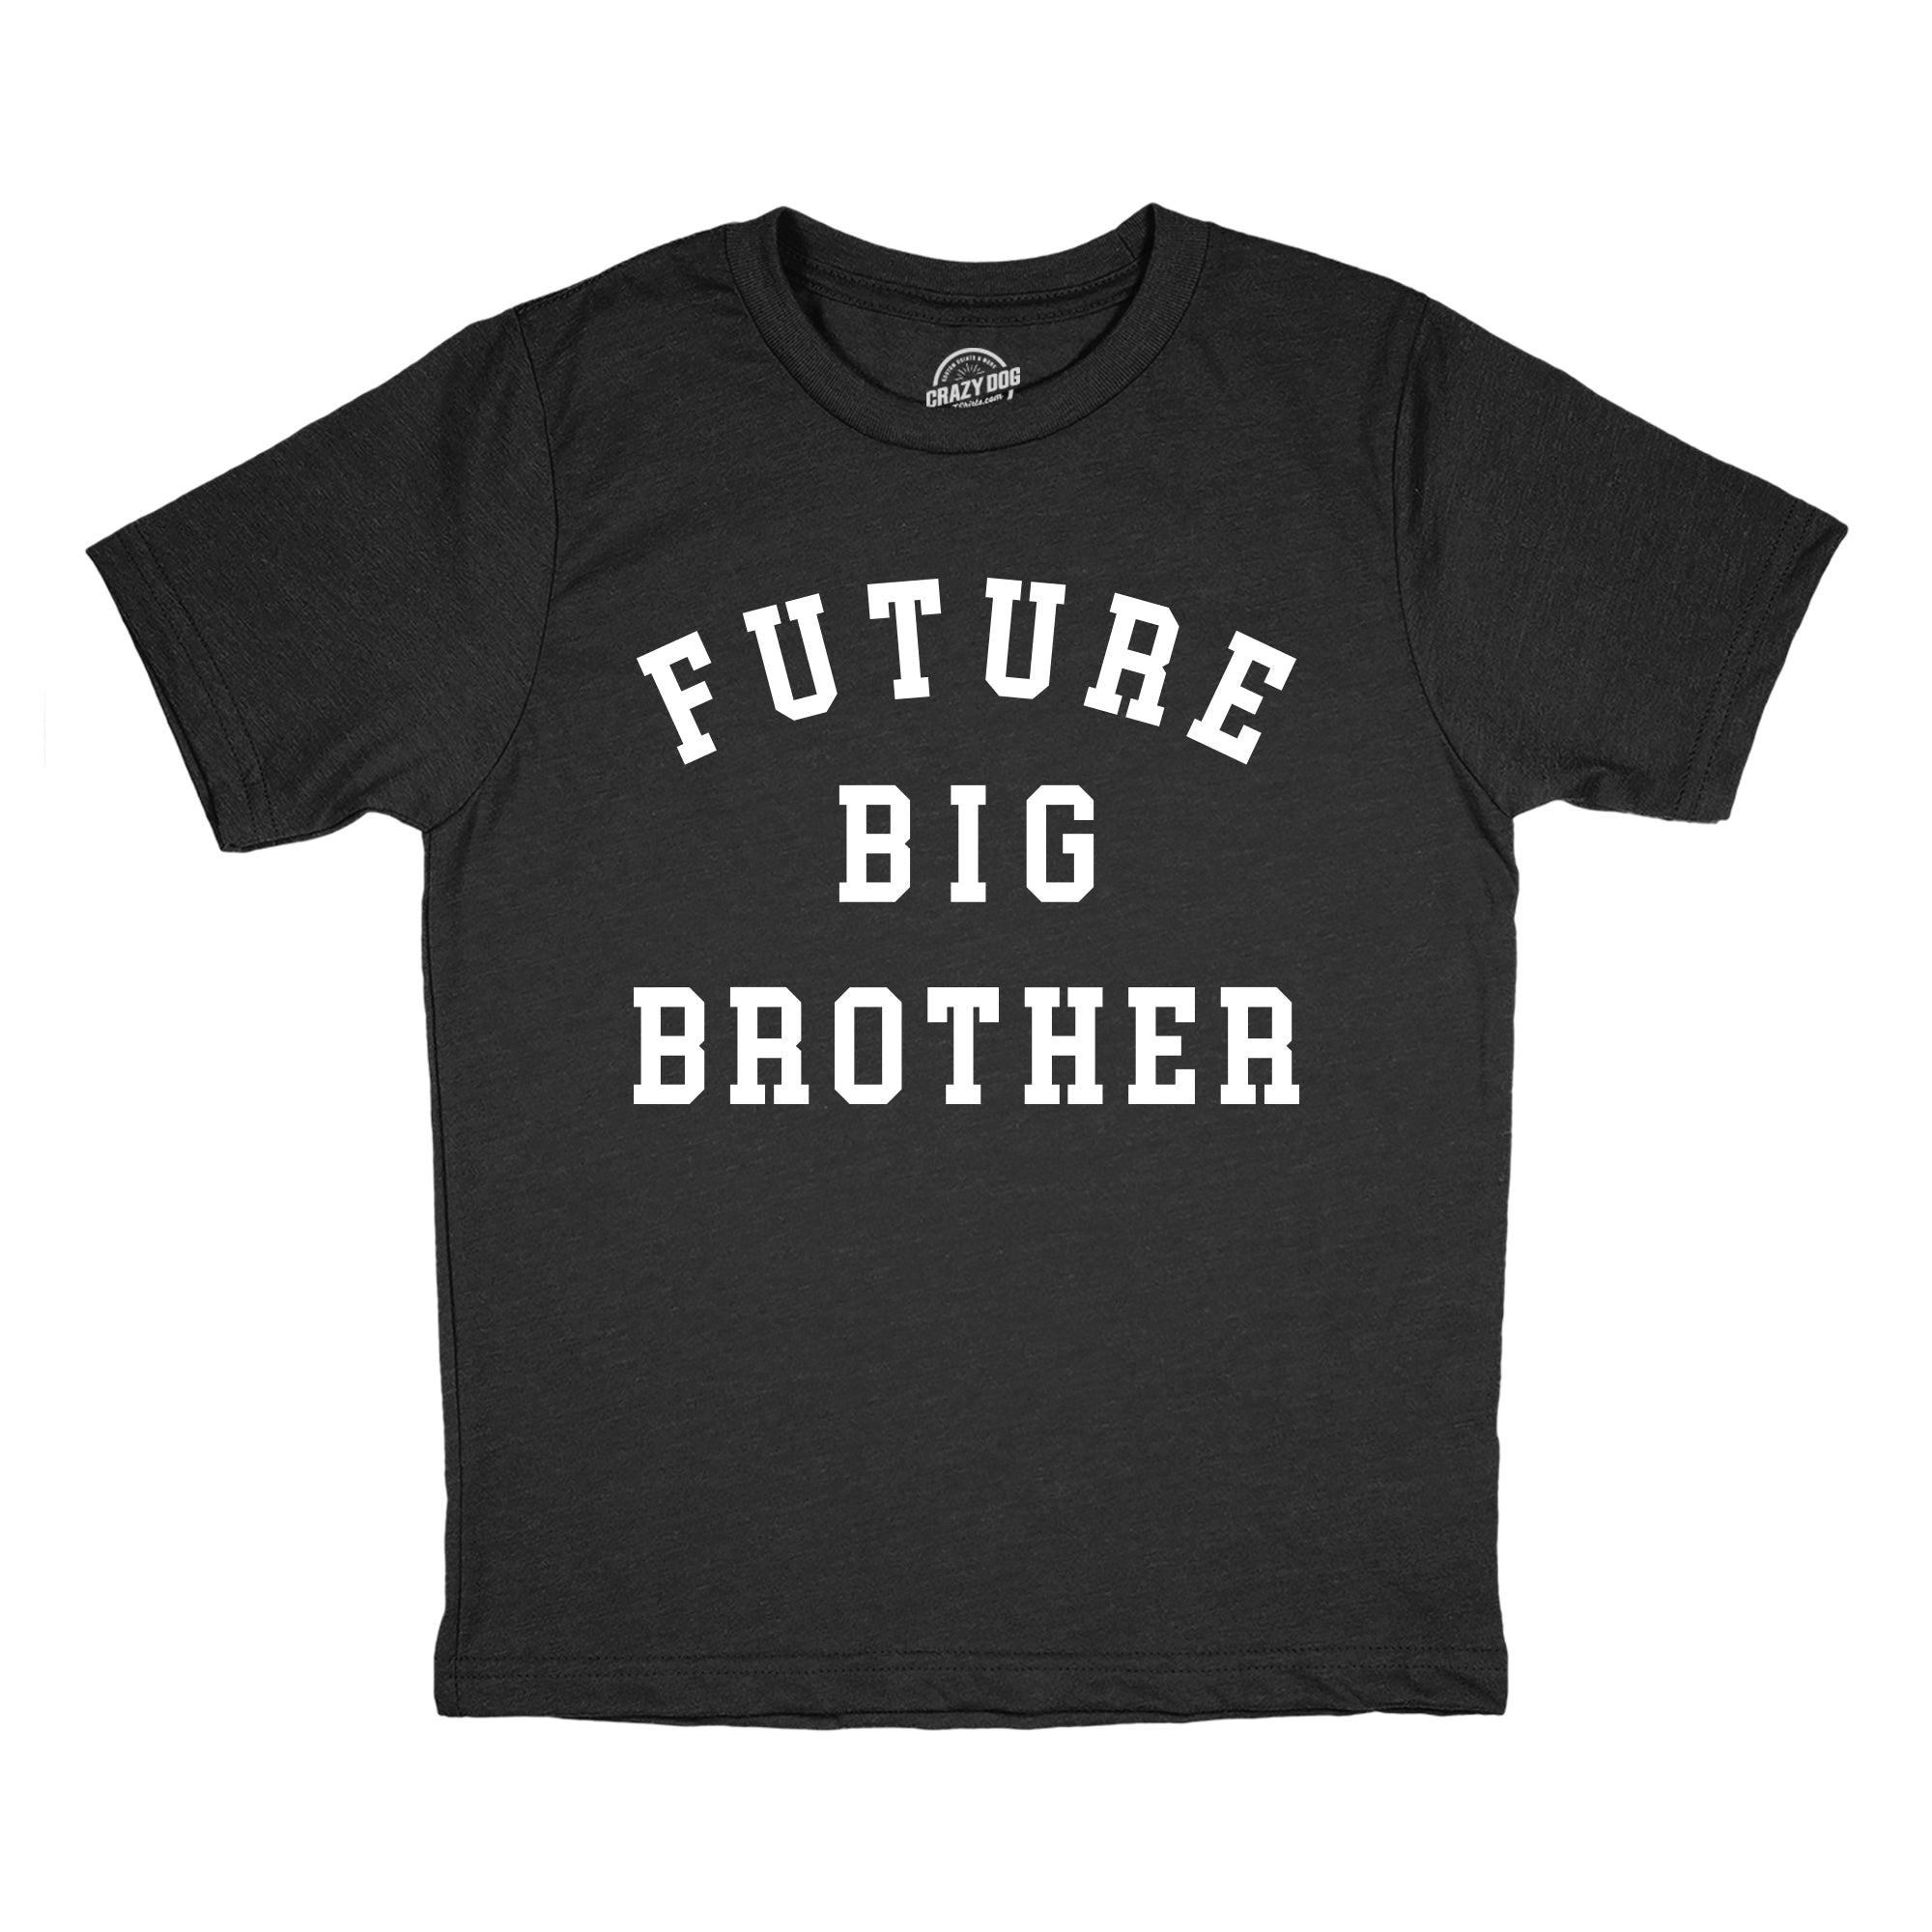 Funny Heather Black - Future Big Brother Future Big Brother Youth T Shirt Nerdy Brother Tee